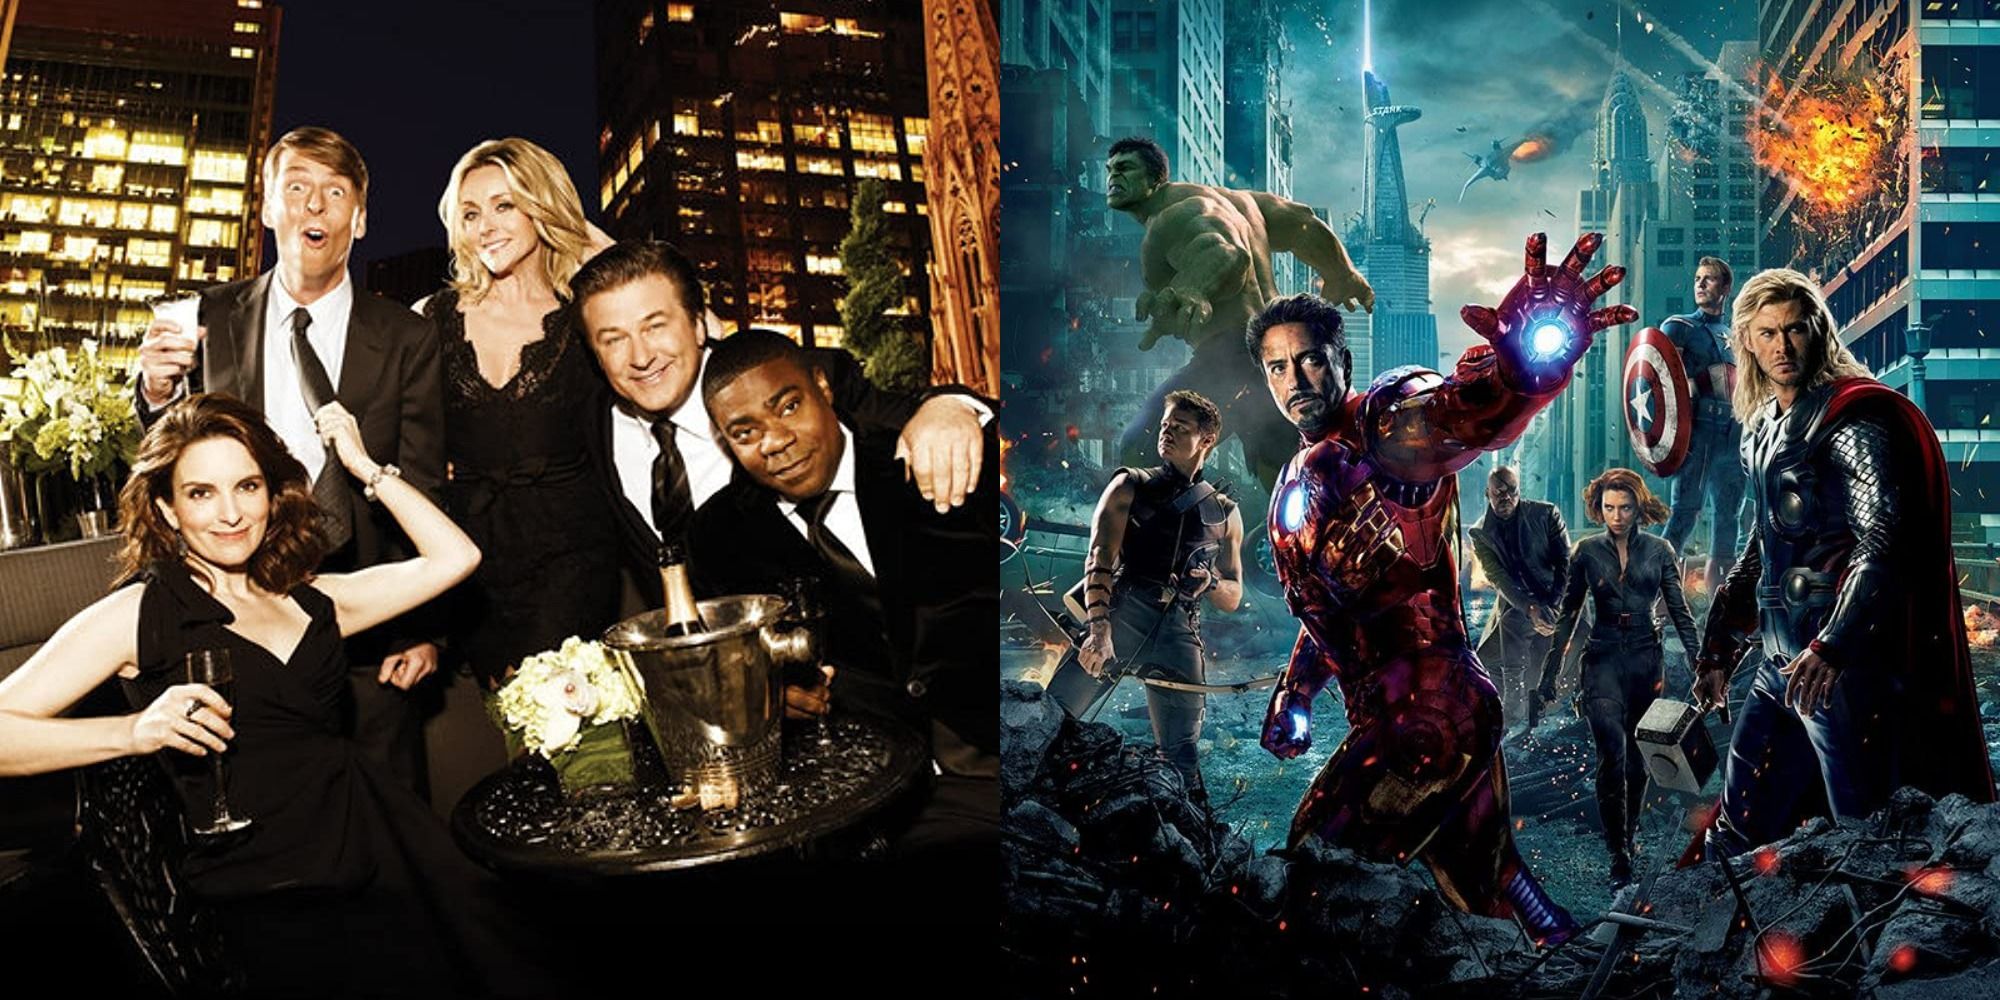 Split image showing the casts of 30 Rock and The Avengers.